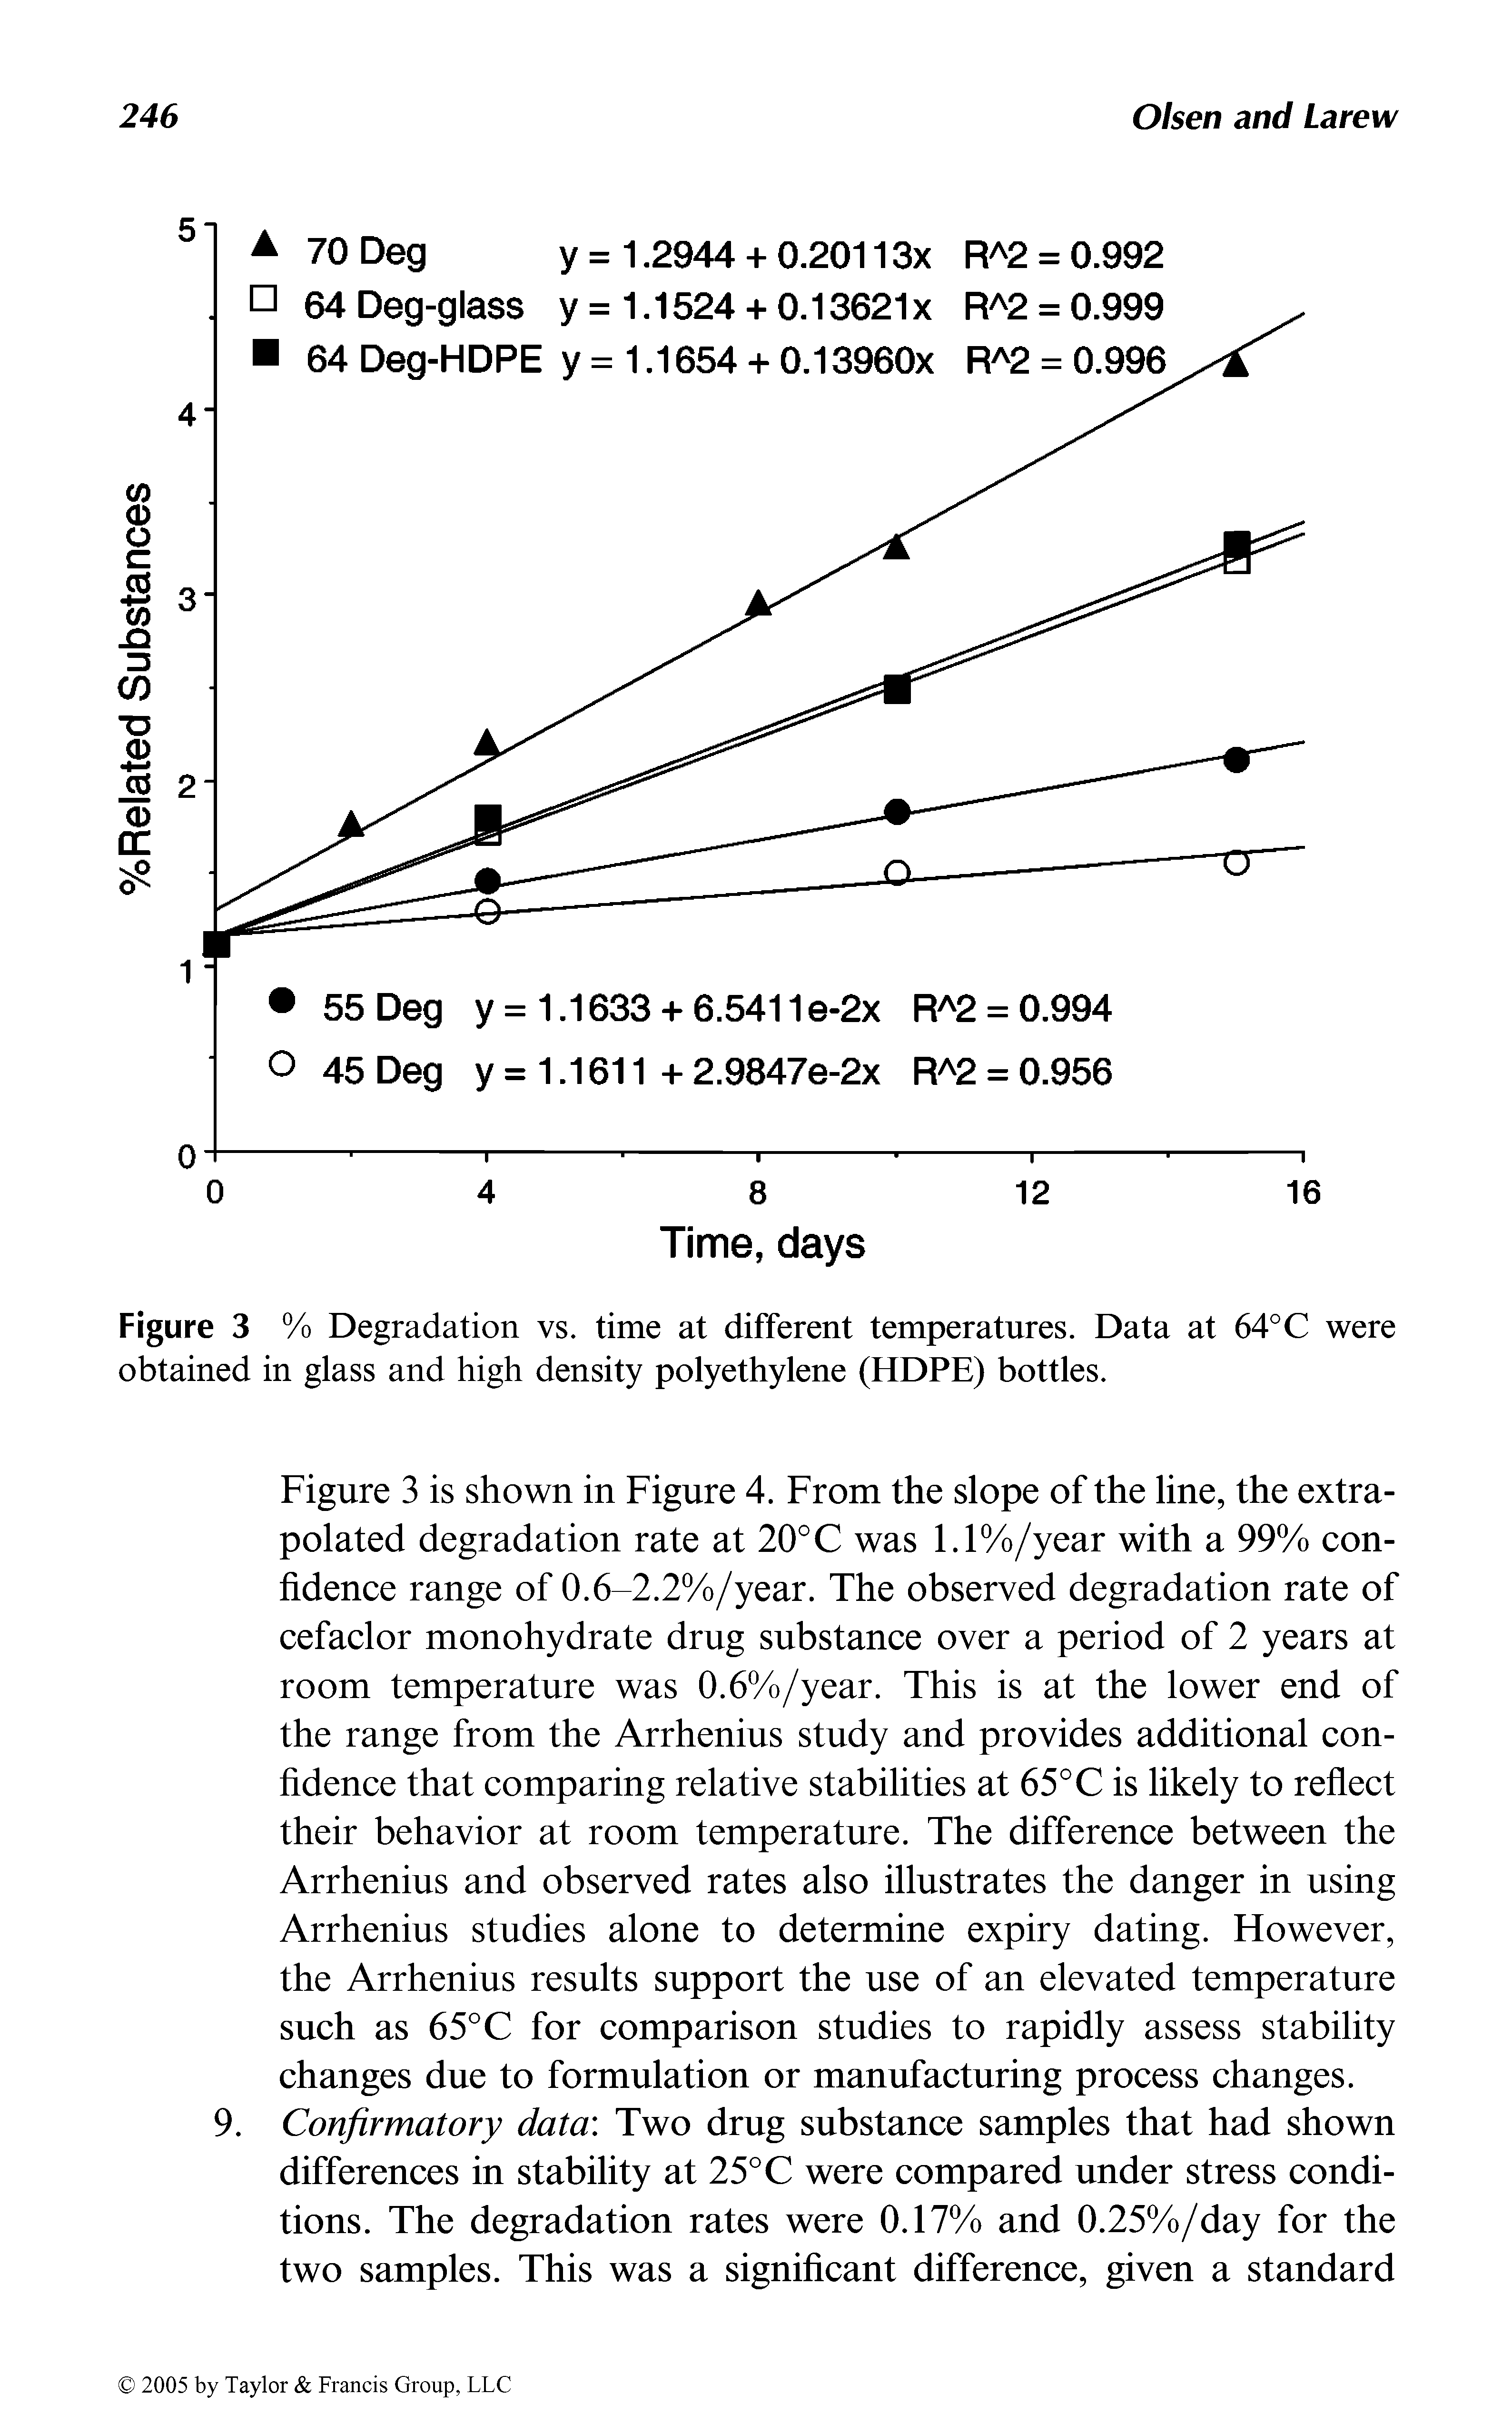 Figure 3 % Degradation vs. time at different temperatures. Data at 64°C were obtained in glass and high density polyethylene (HDPE) bottles.